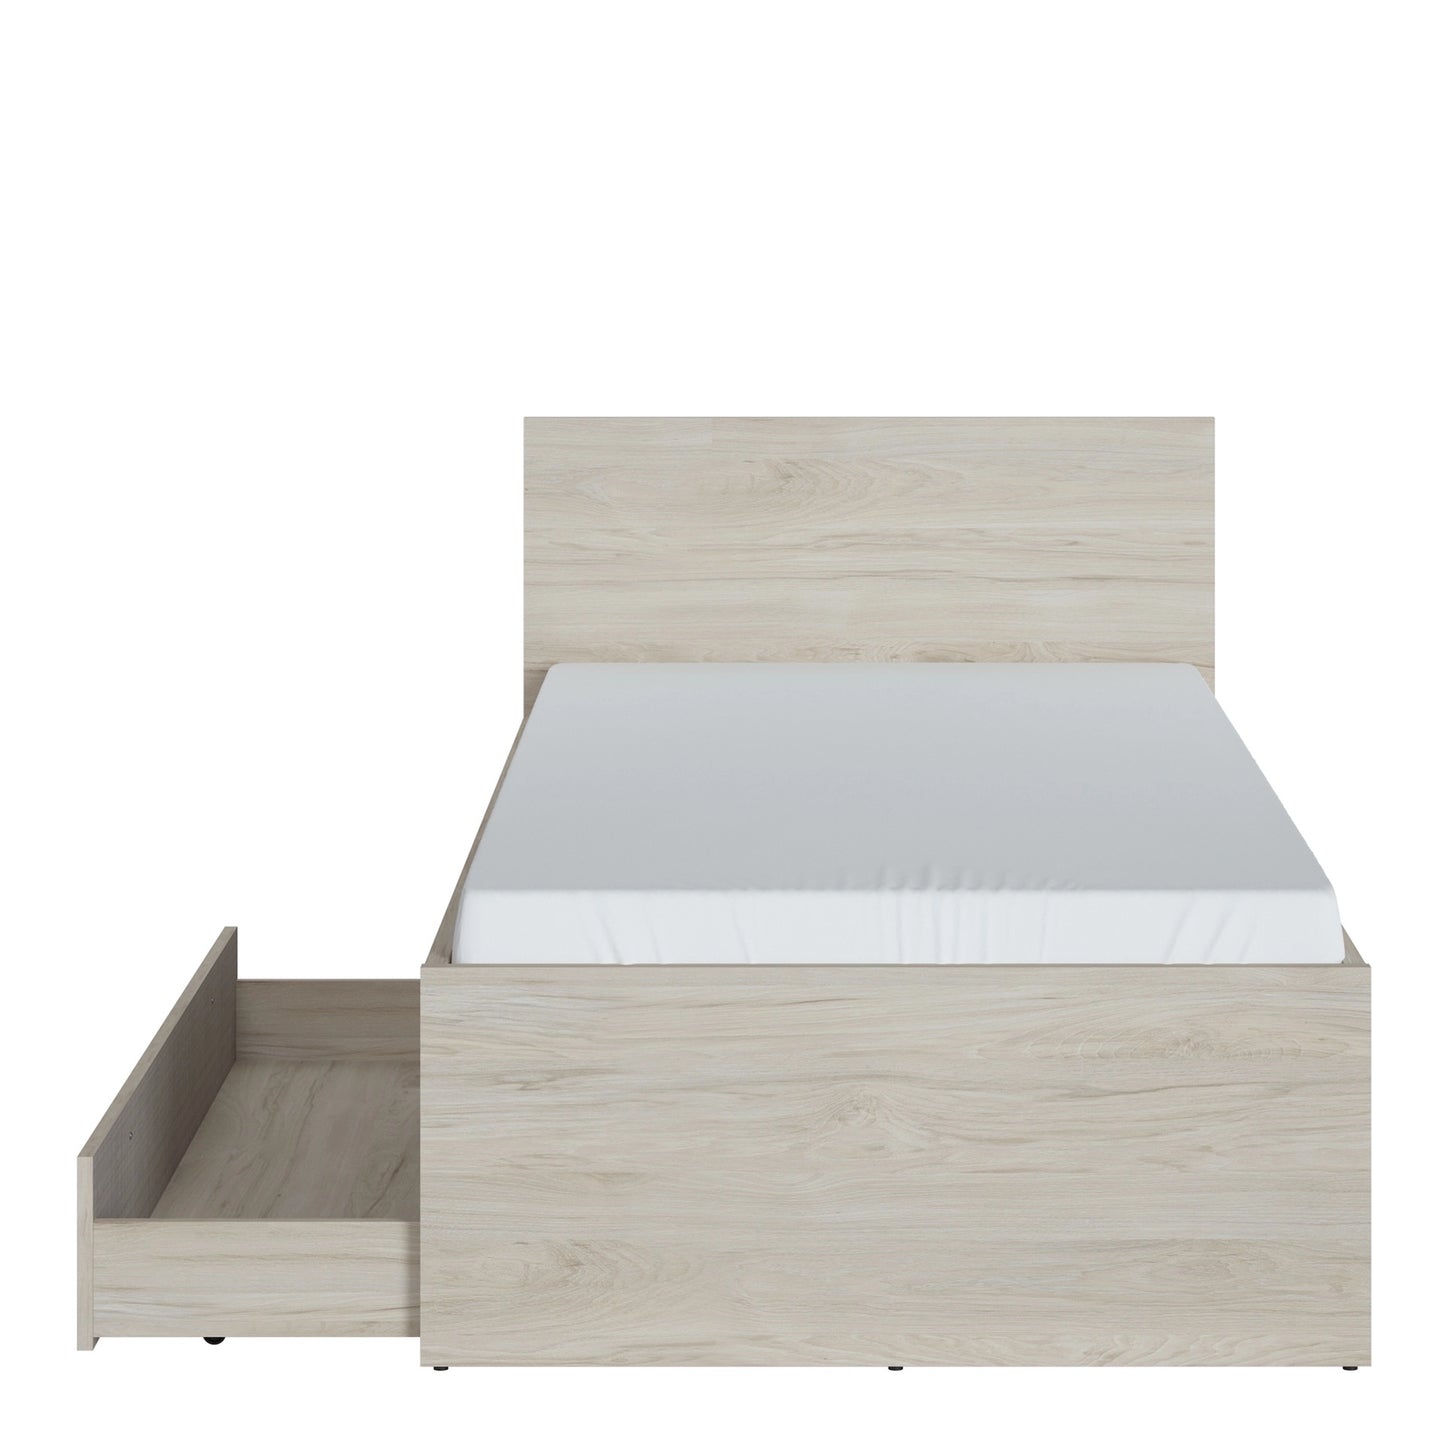 Furniture To Go Denim 3ft Single Bed with 1 Drawer in Light Walnut, Grey Fabric Effect & Cashmere